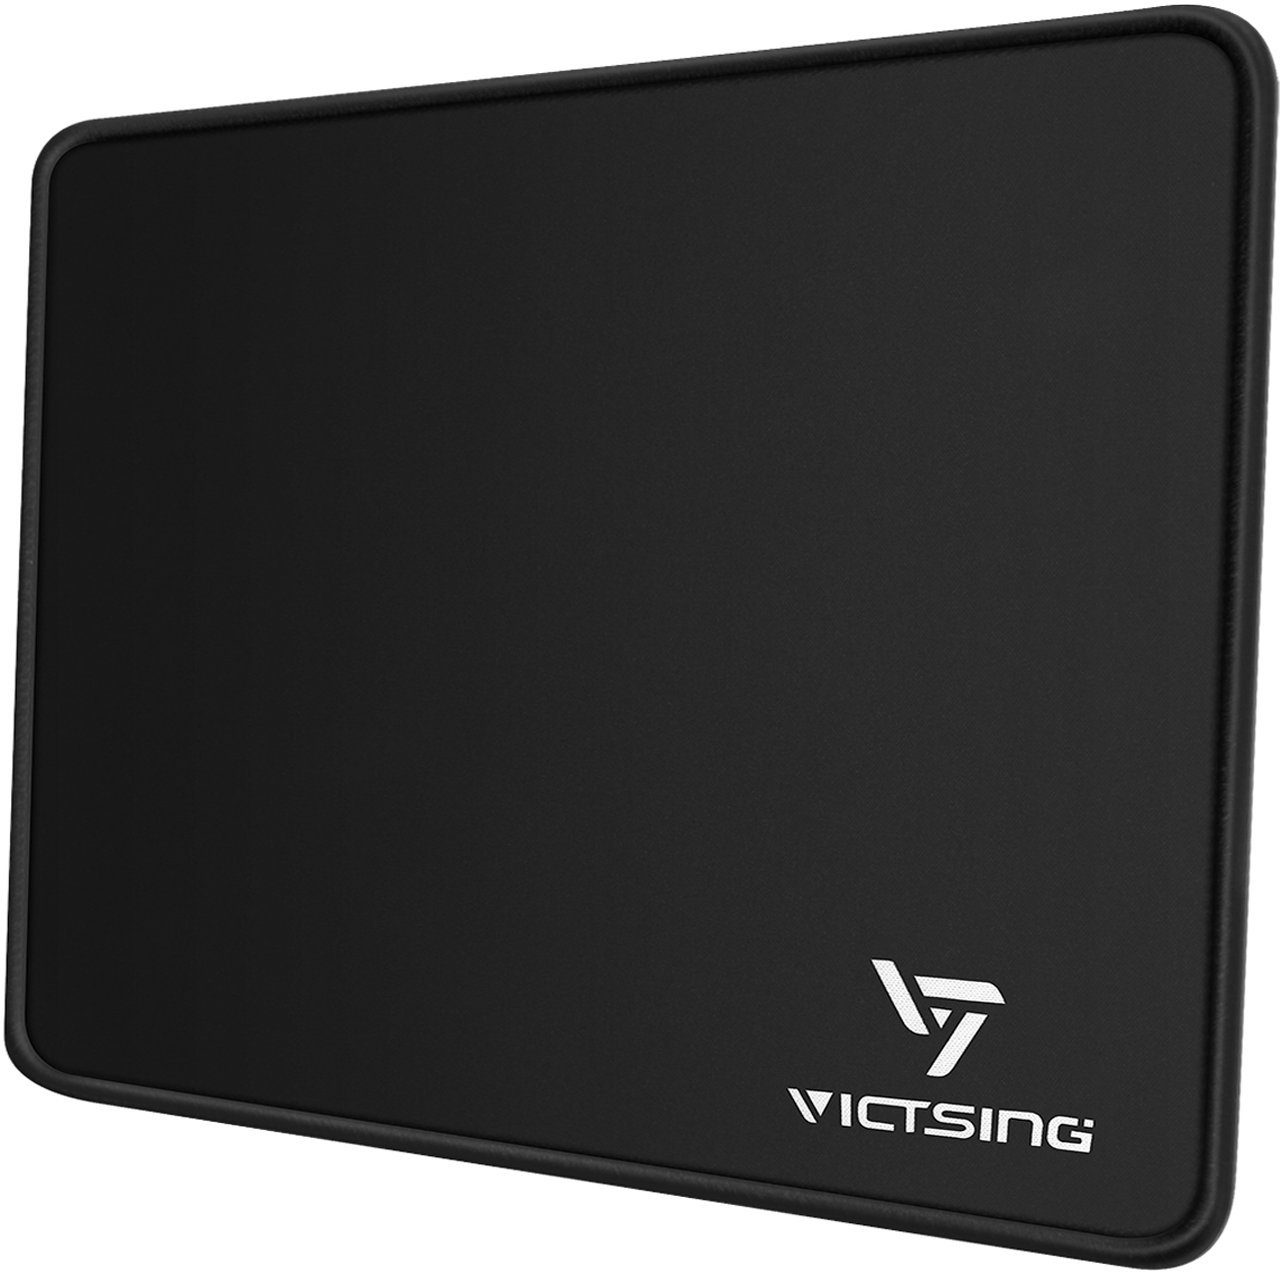 Mouse Pad: VicTsing Mouse Pad with Stitched Edge, Premium-Textured Mouse Mat, Non-Slip Rubber Base Mousepad for Laptop, Computer & PC, 10.2×8.3×0.08 inches, Black